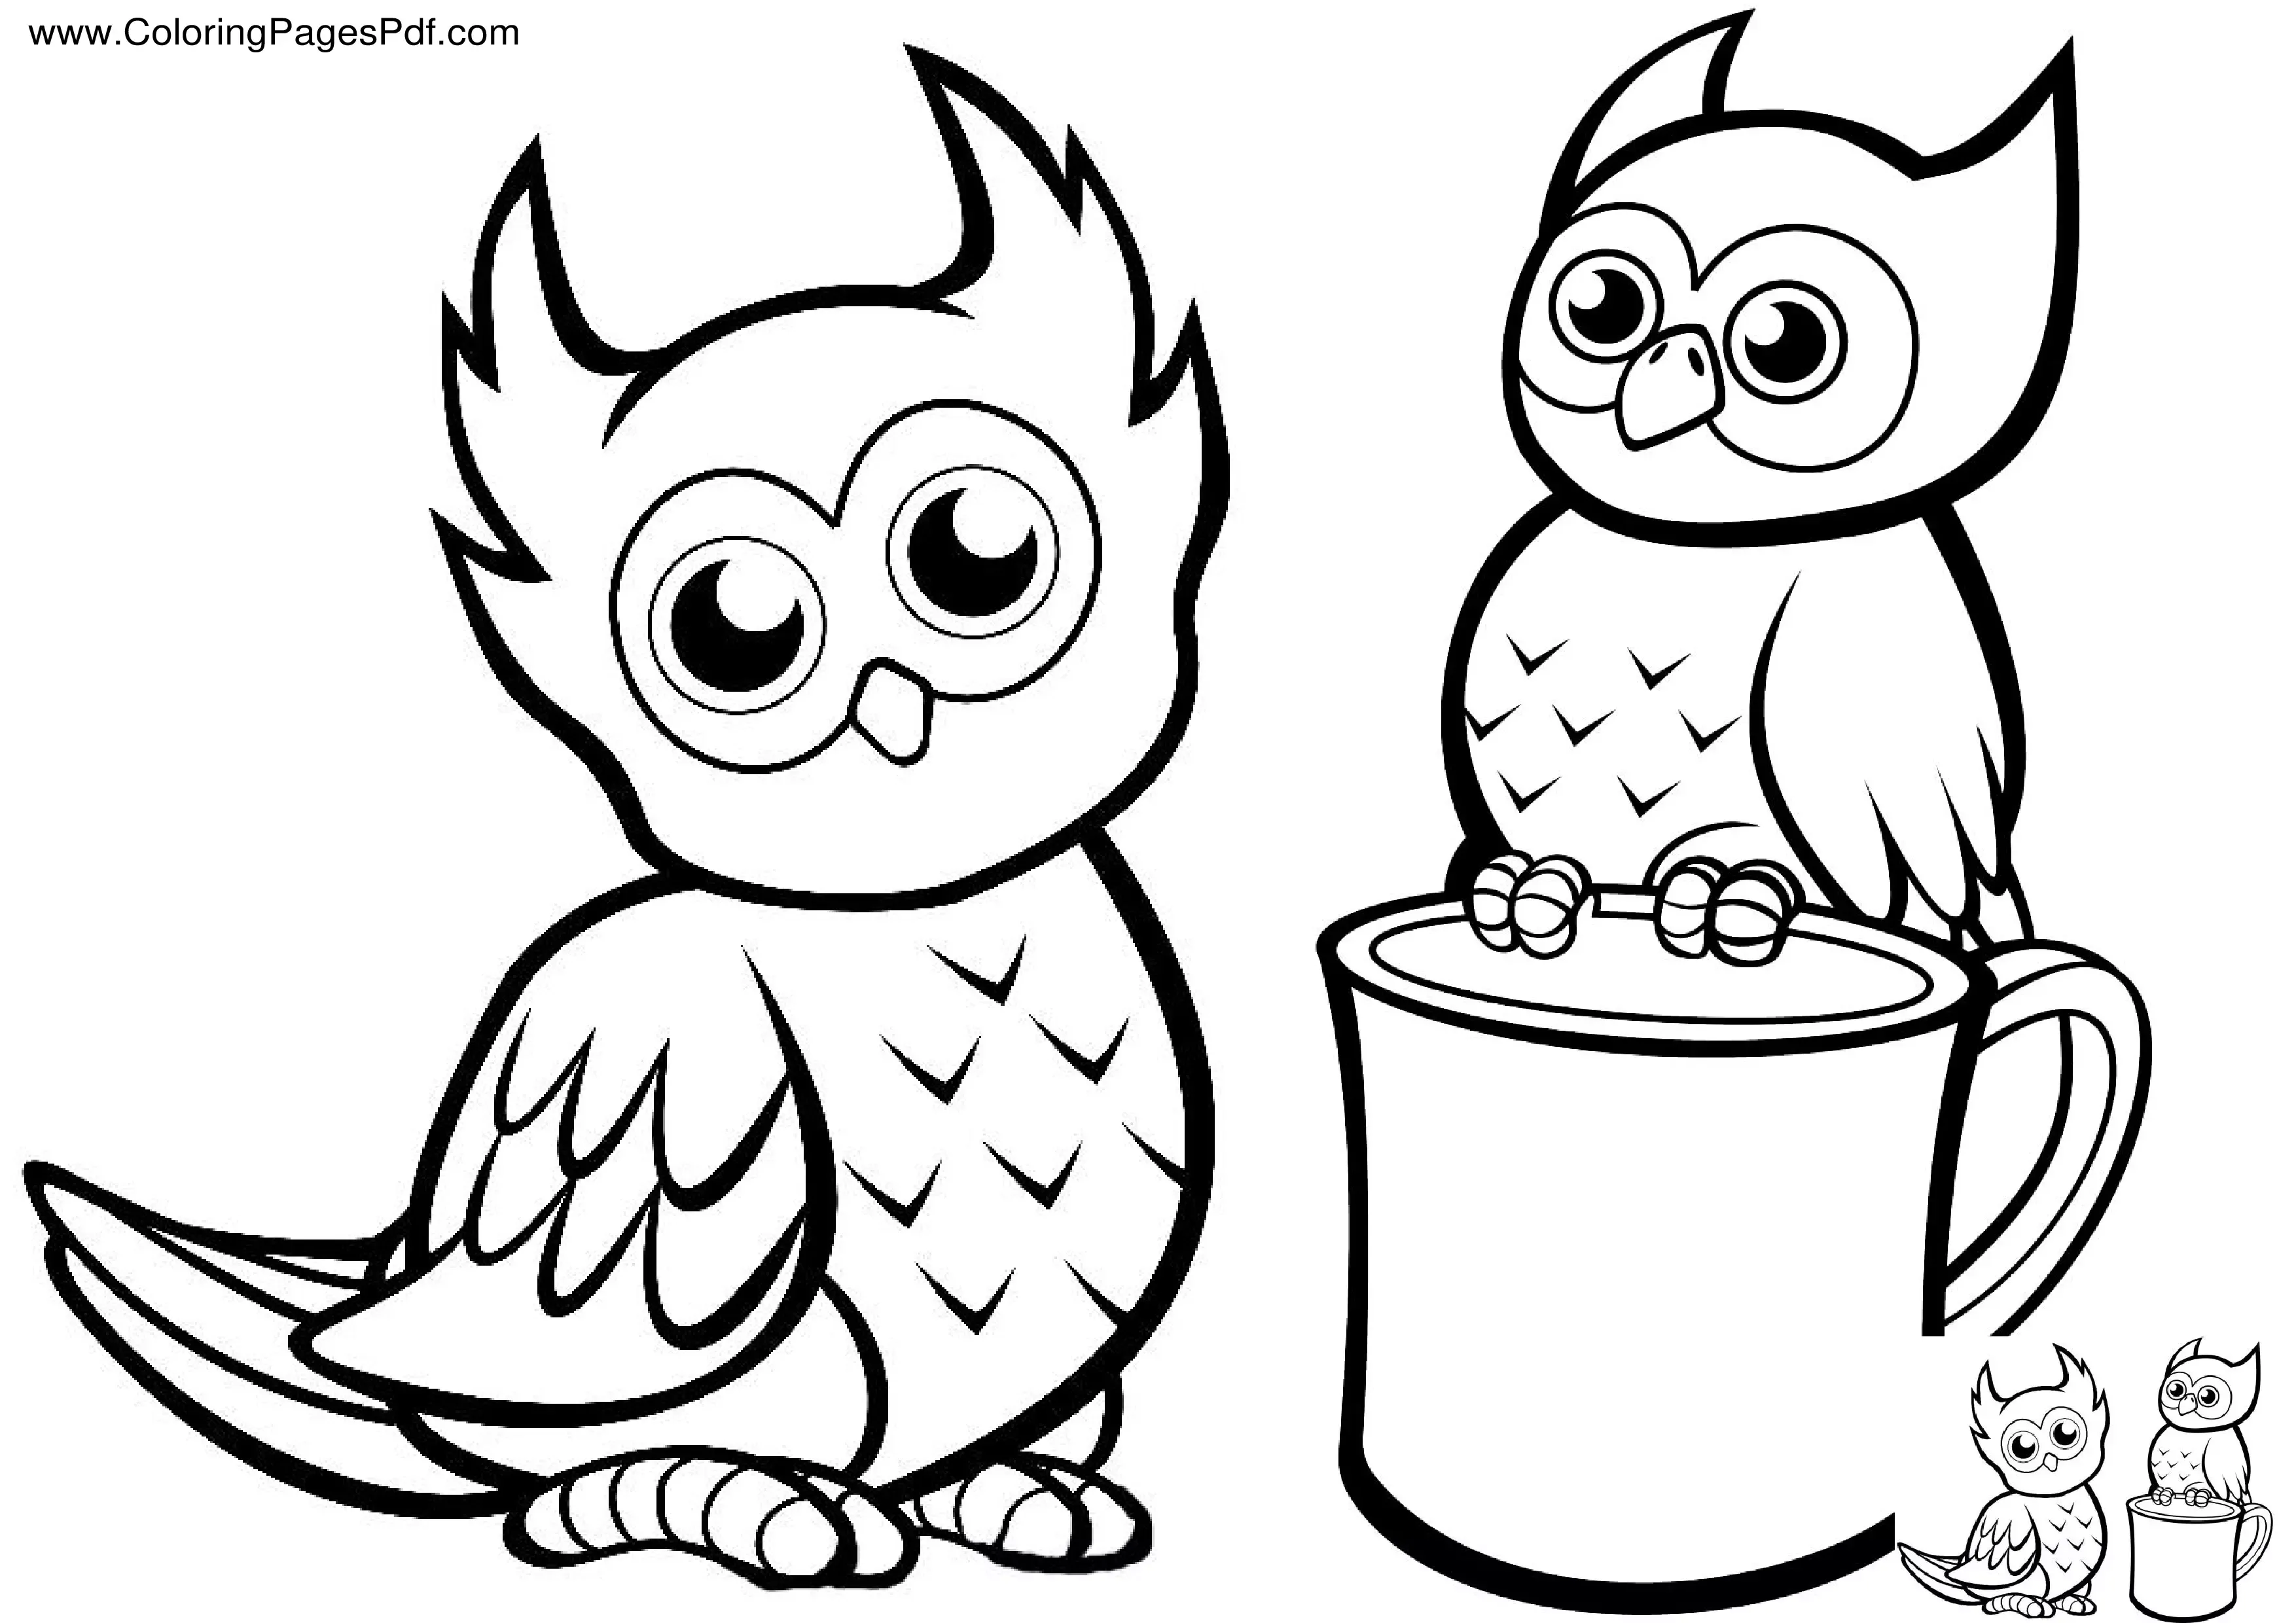 Cute owl coloring pages